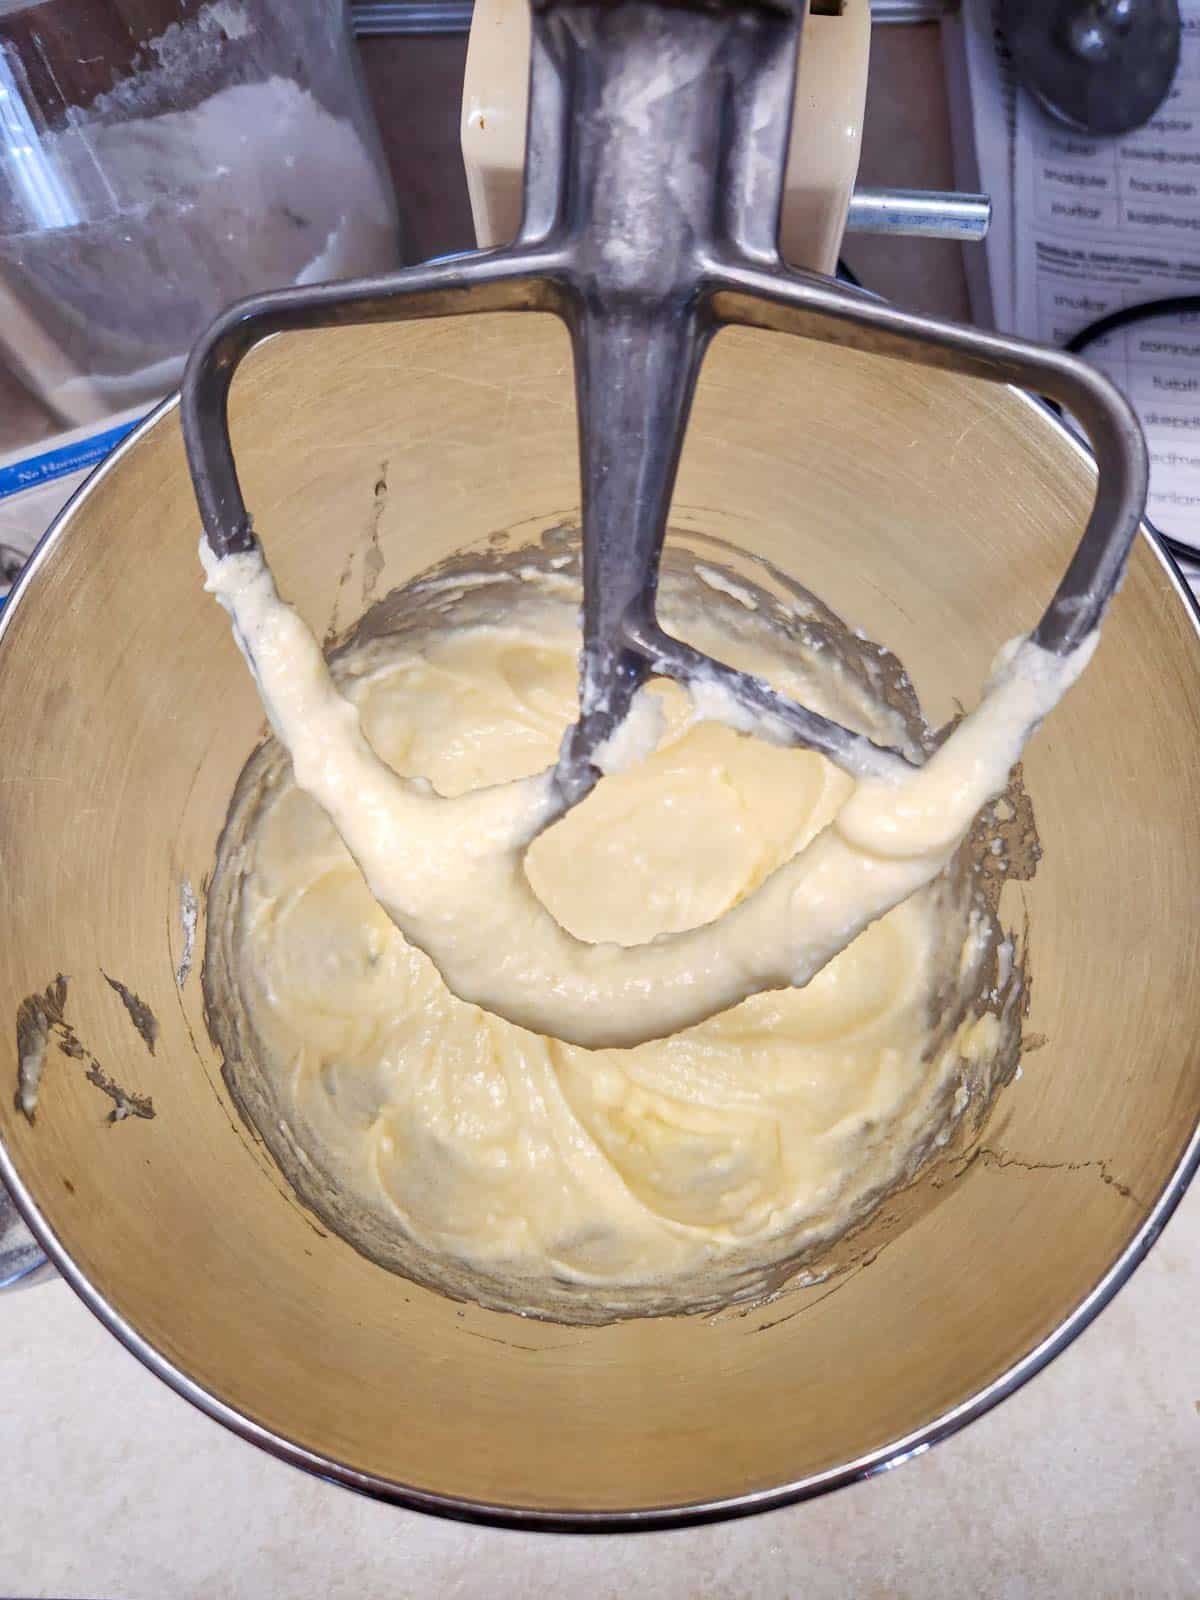 butter, oil, powdered sugar and granulated sugar creamed together in a mixer